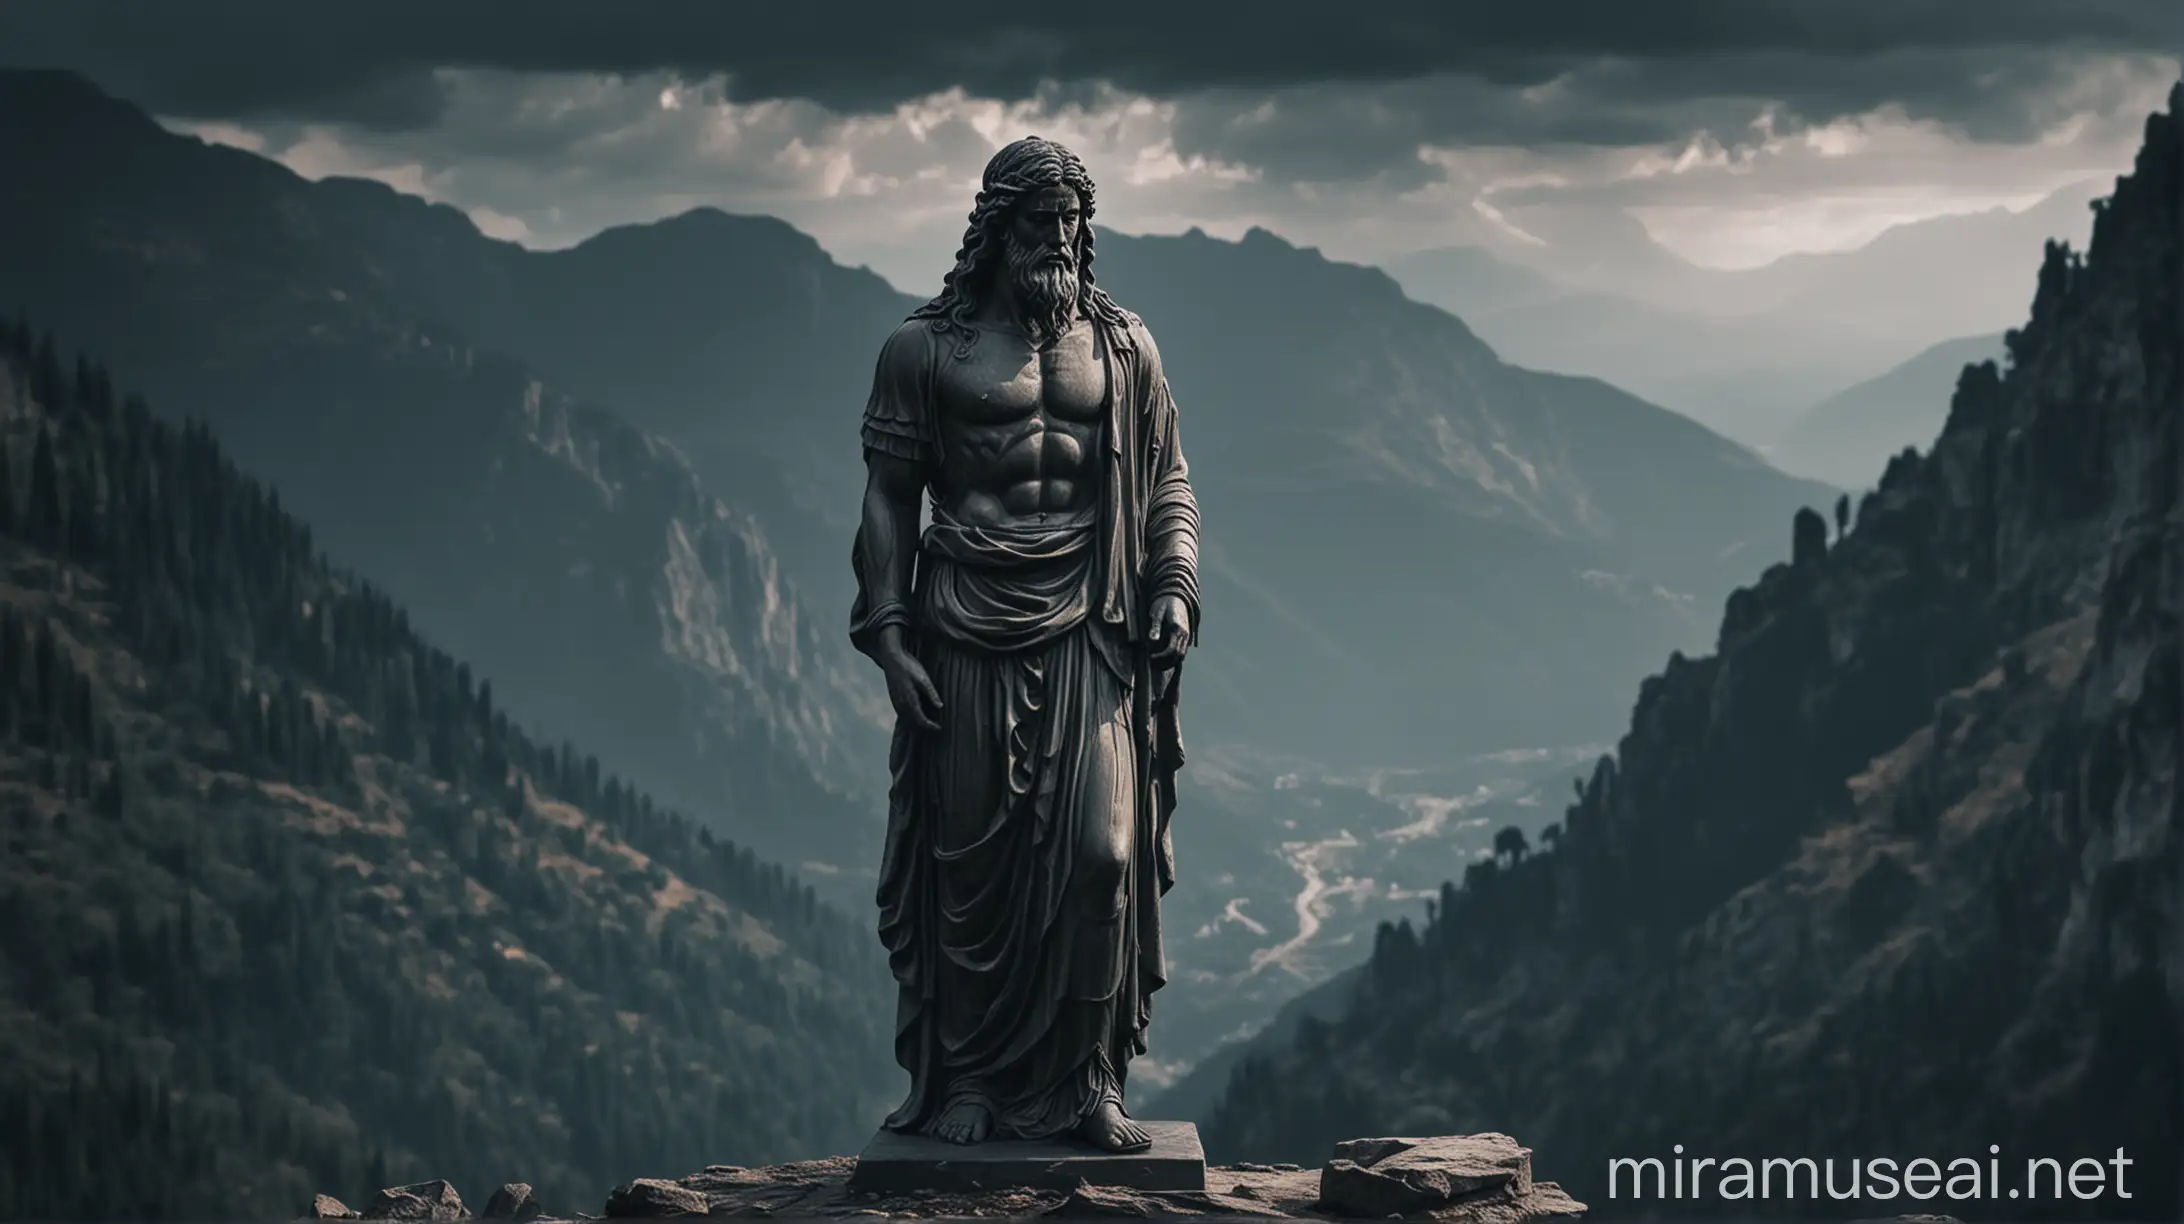 Stoic Statue with Long Hair Standing in the Mountains